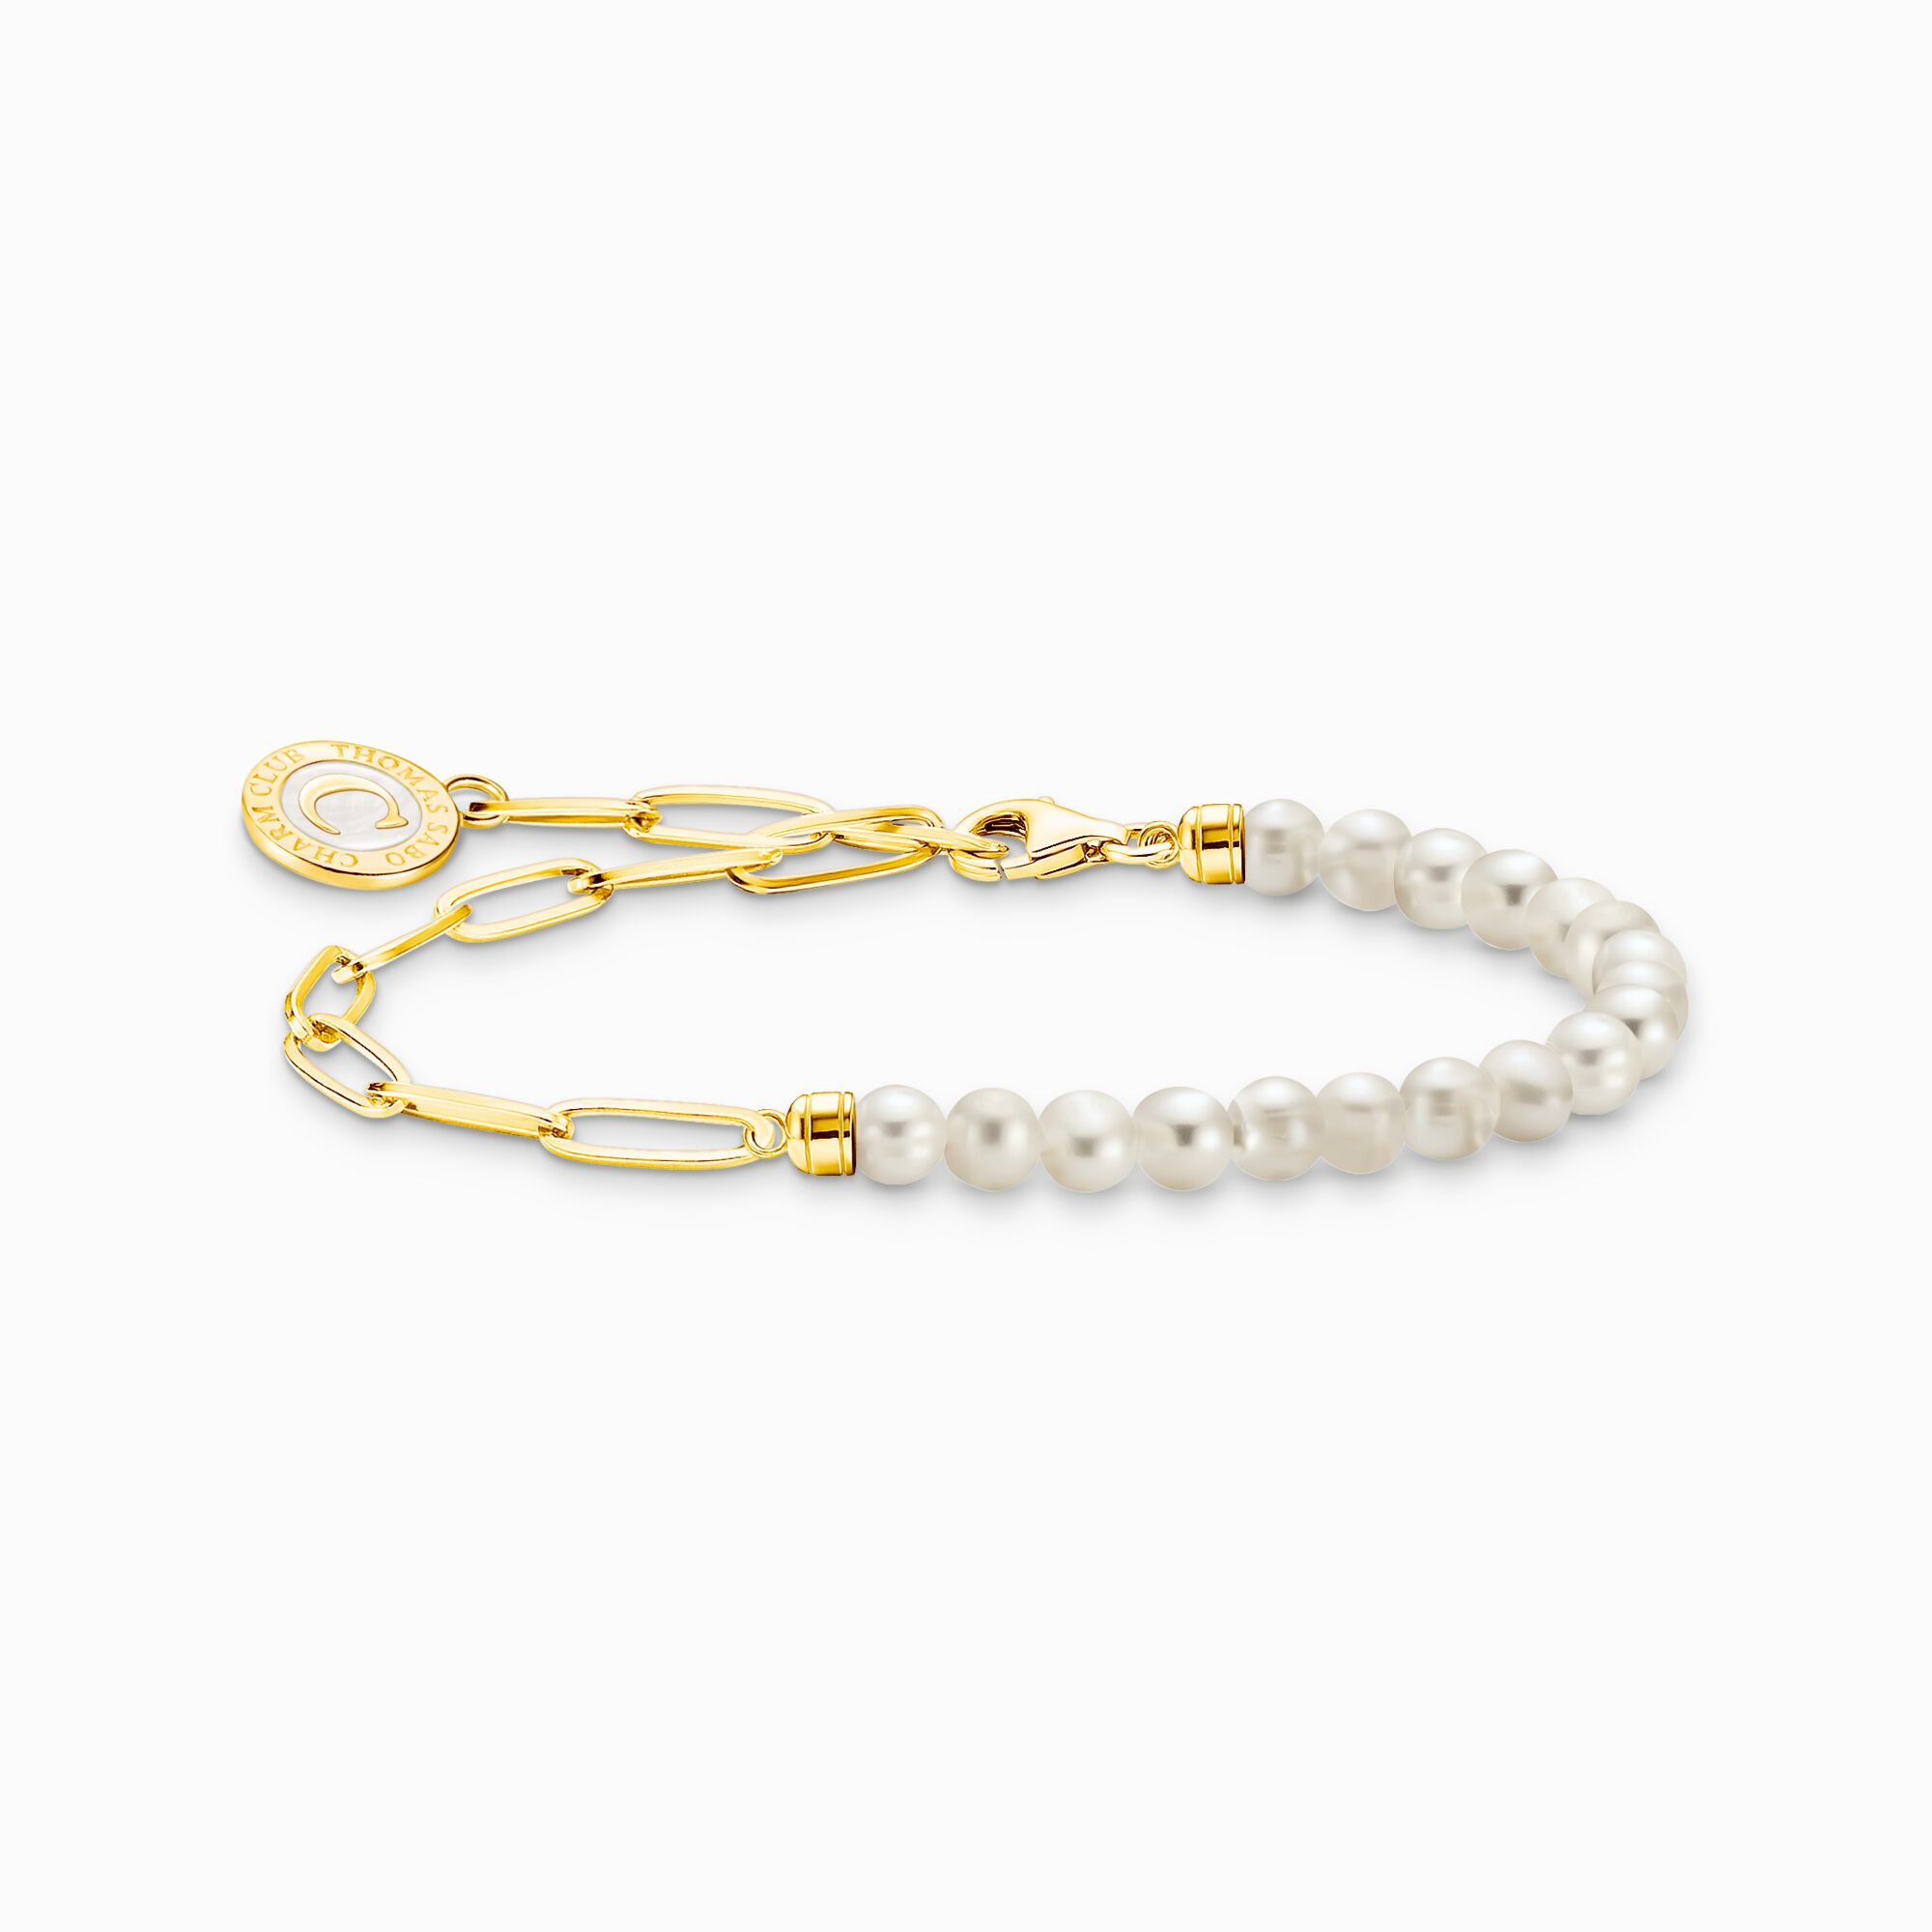 Member Charm bracelet with white pearls and Charmista disc gold plated from the Charm Club collection in the THOMAS SABO online store